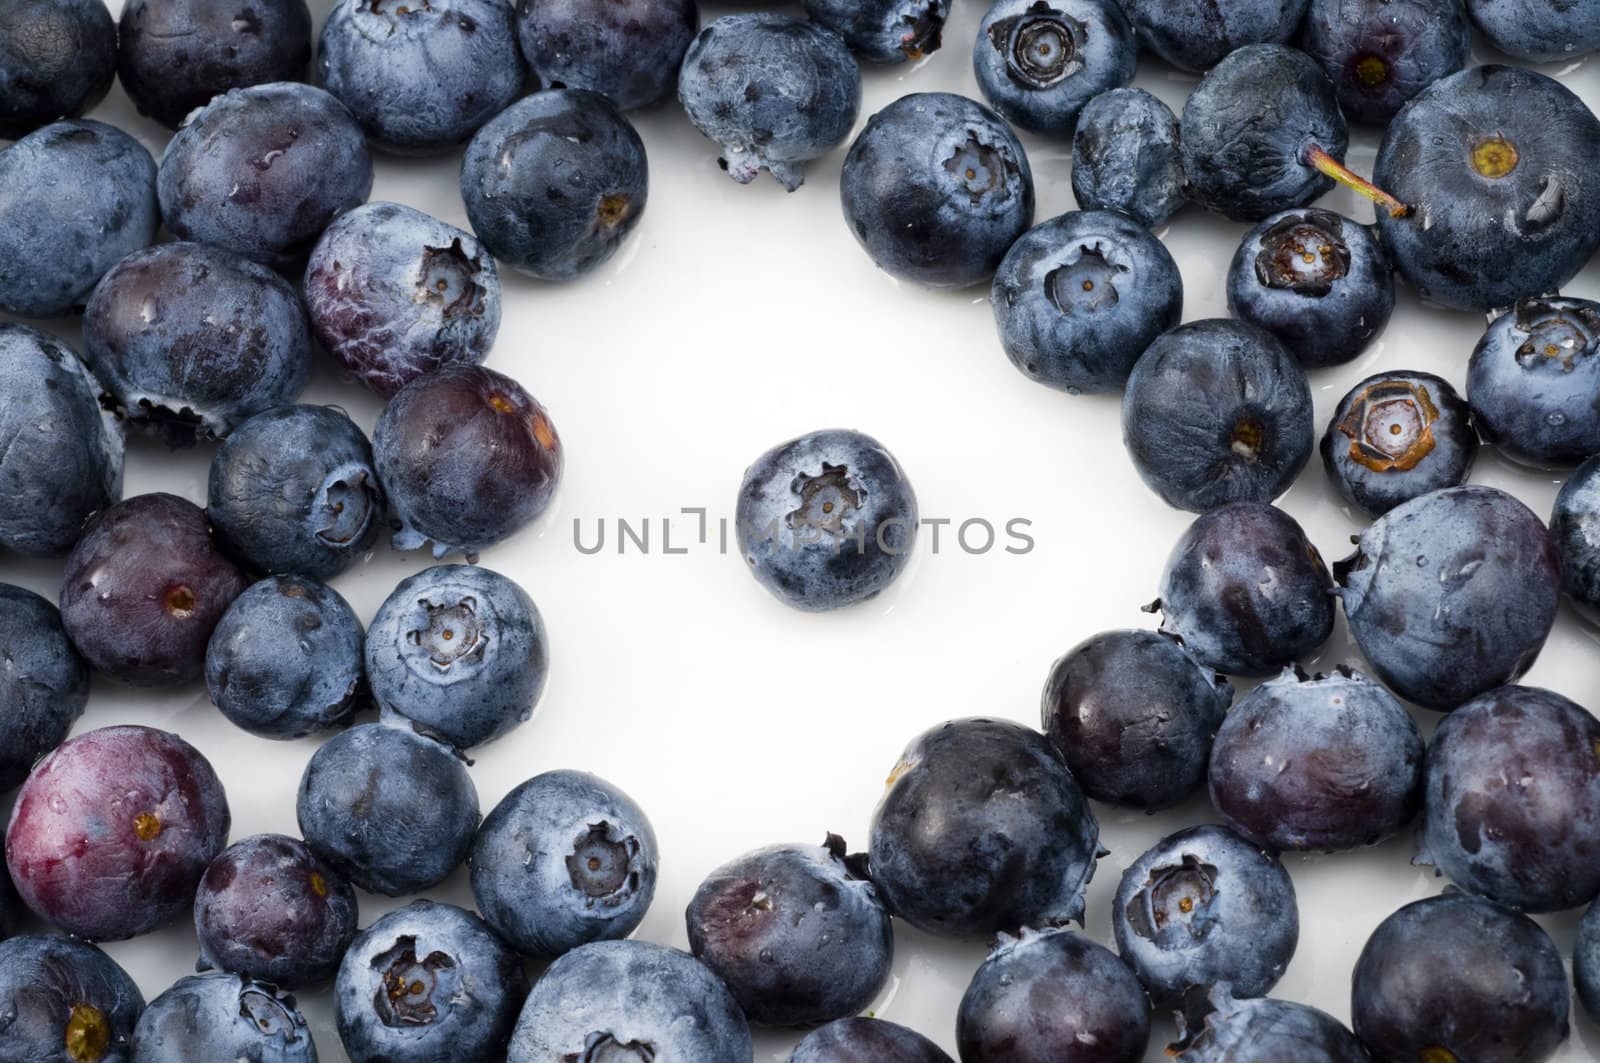 Single blueberry in the center of a group of blueberries on a white plate